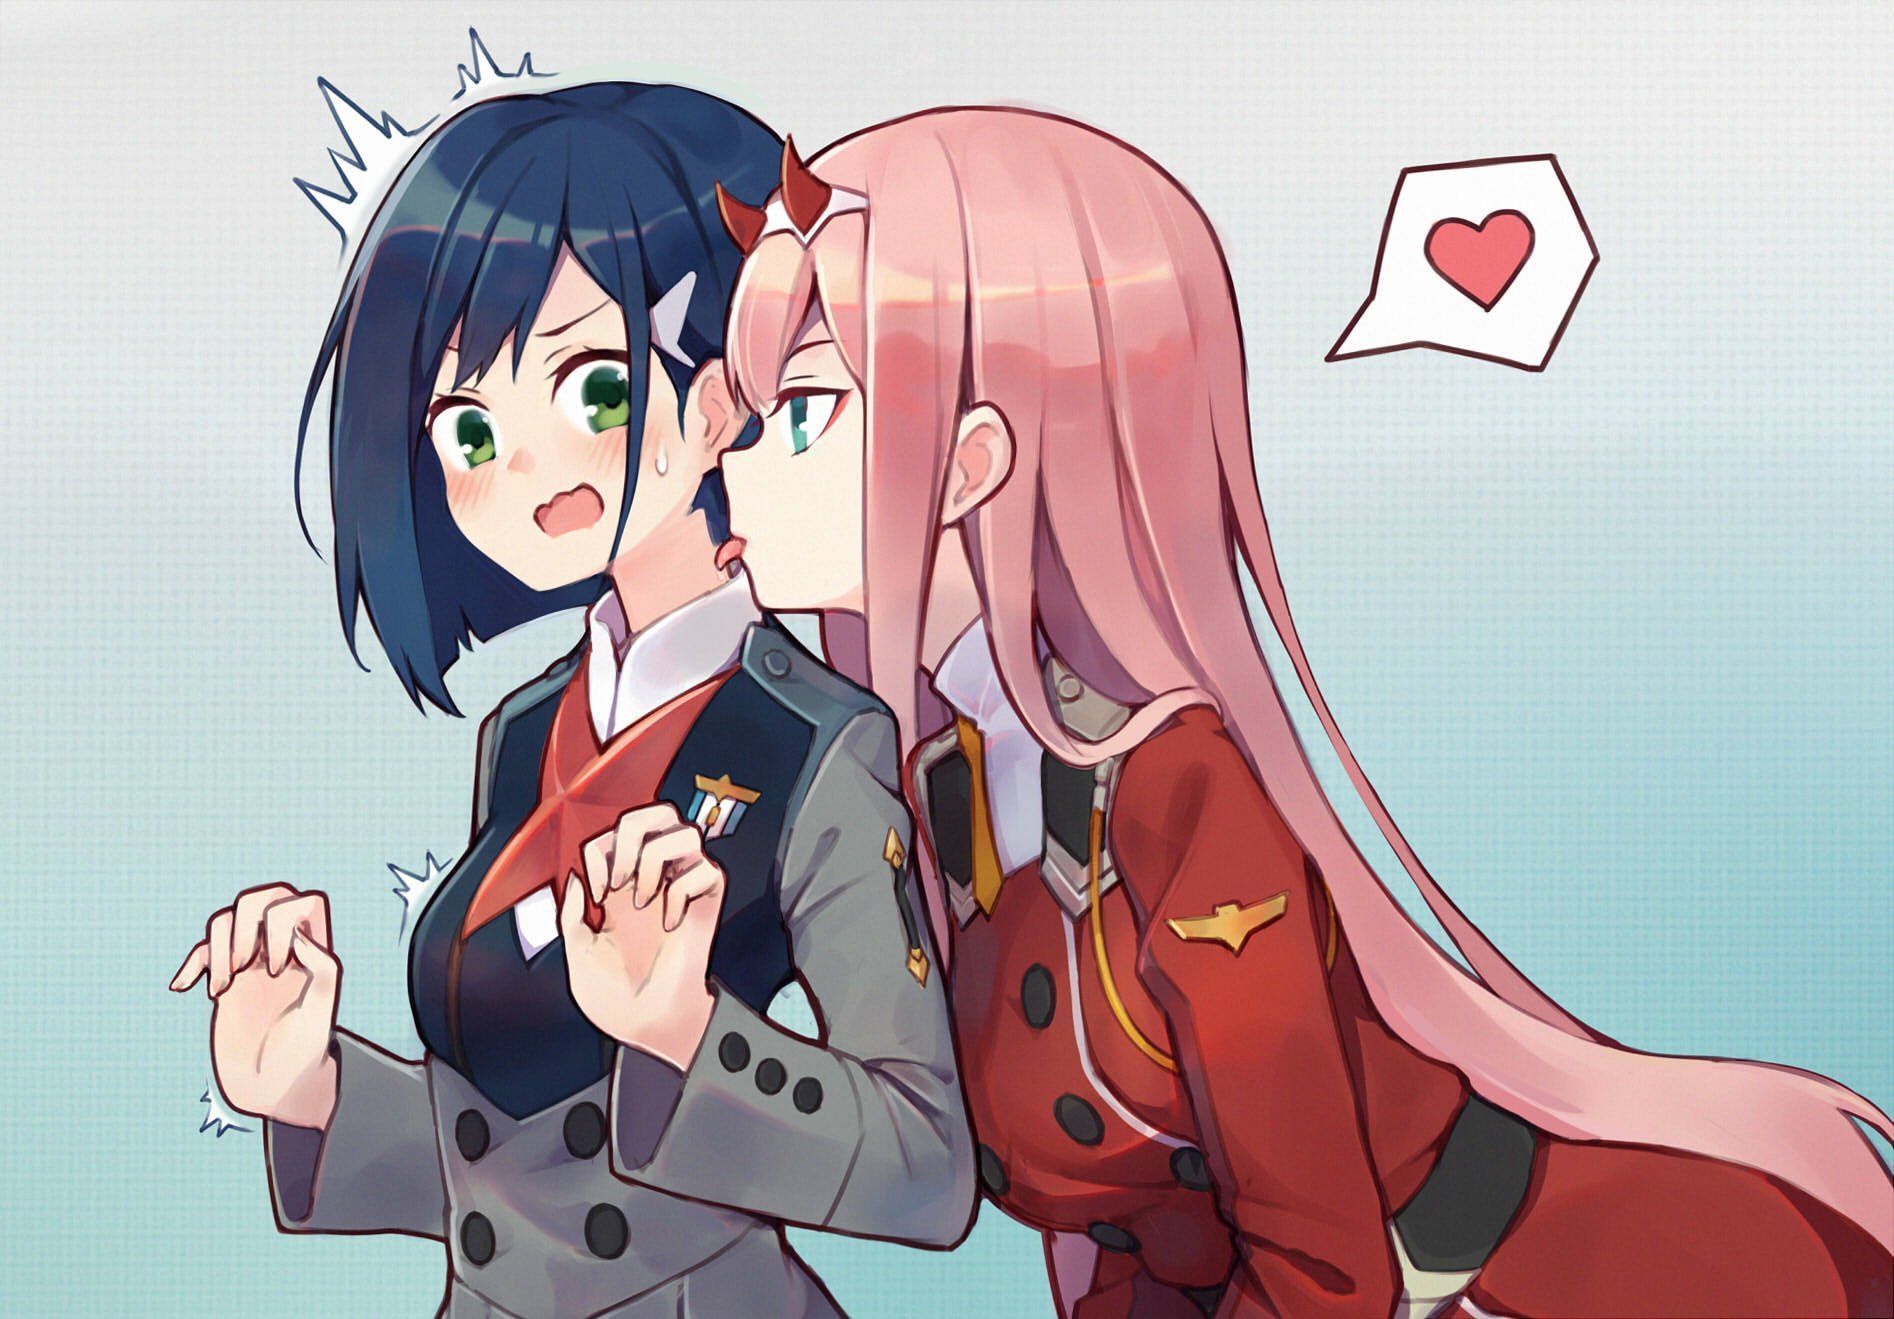 Darling in the Franxx Manga Will Diverge Greatly From The Anime